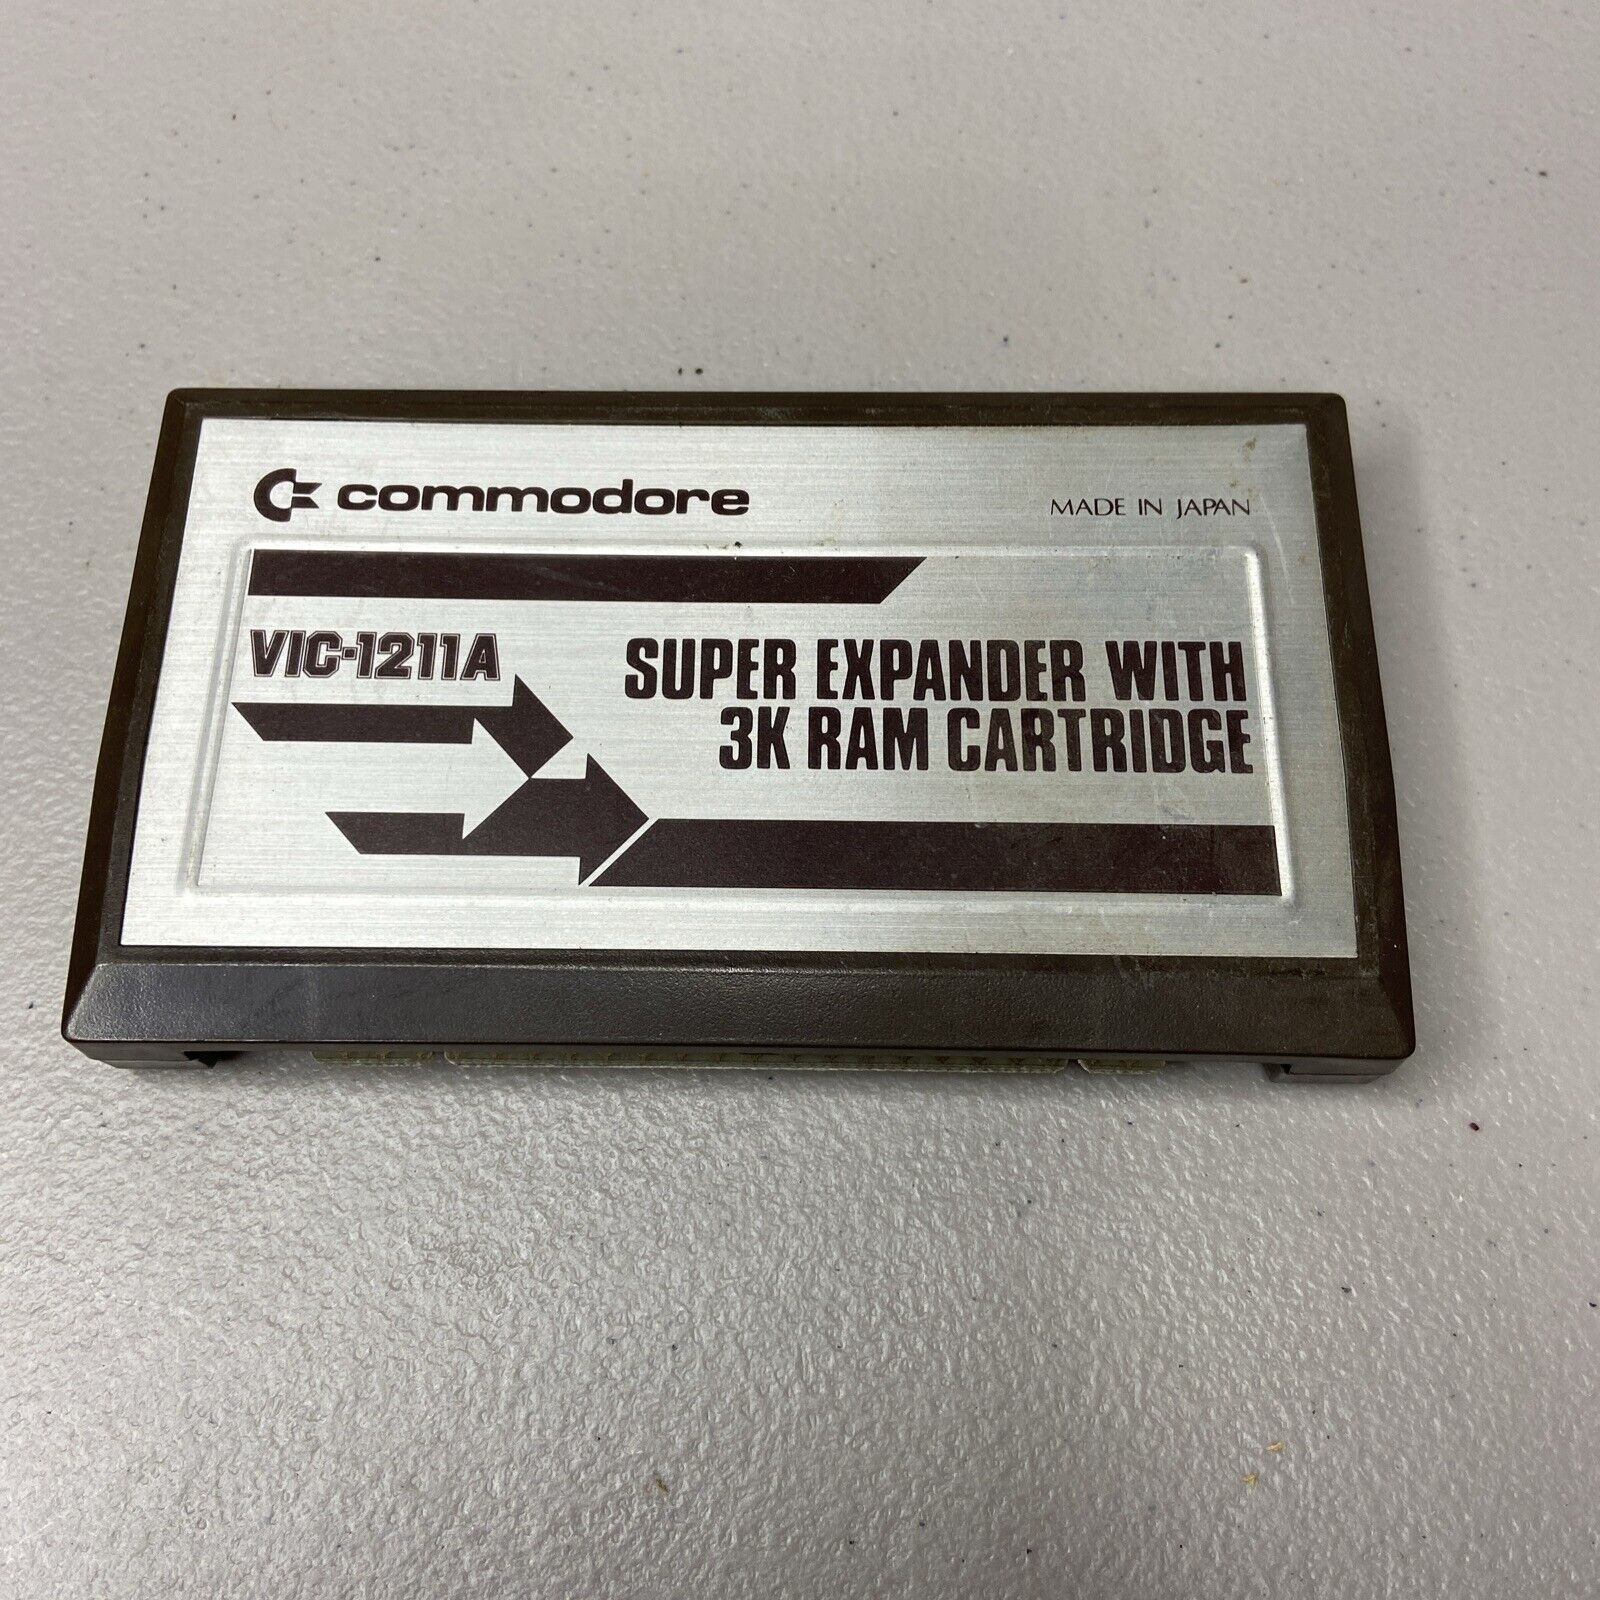 USED COMMODORE VIC 20 VIC-1211A SUPER EXPANDER WITH 3K RAM CARTRIDGE GRAPHICS